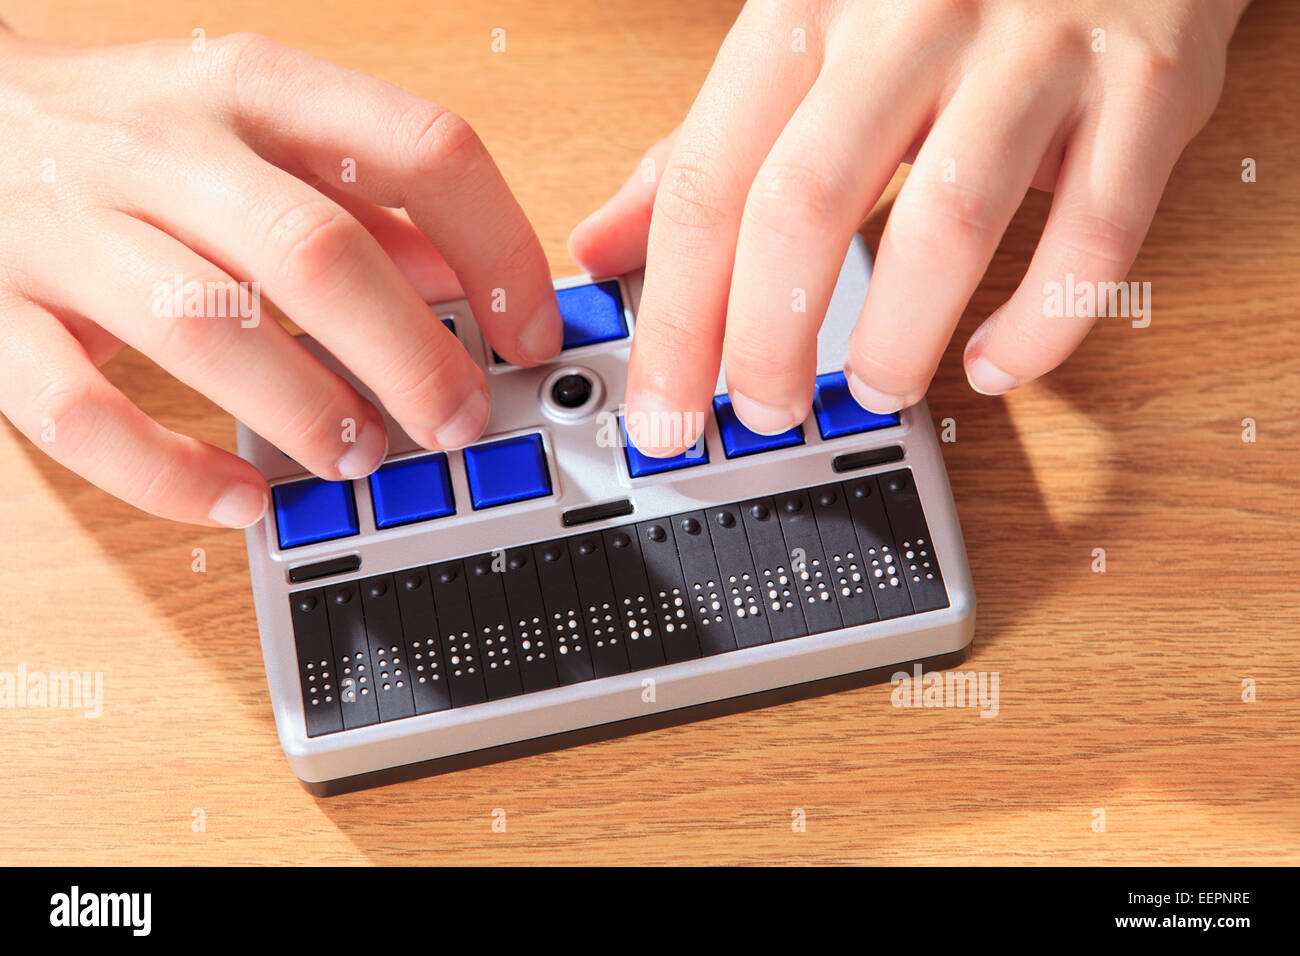 Student with visual impairment using her Braille display to communicate Stock Photo